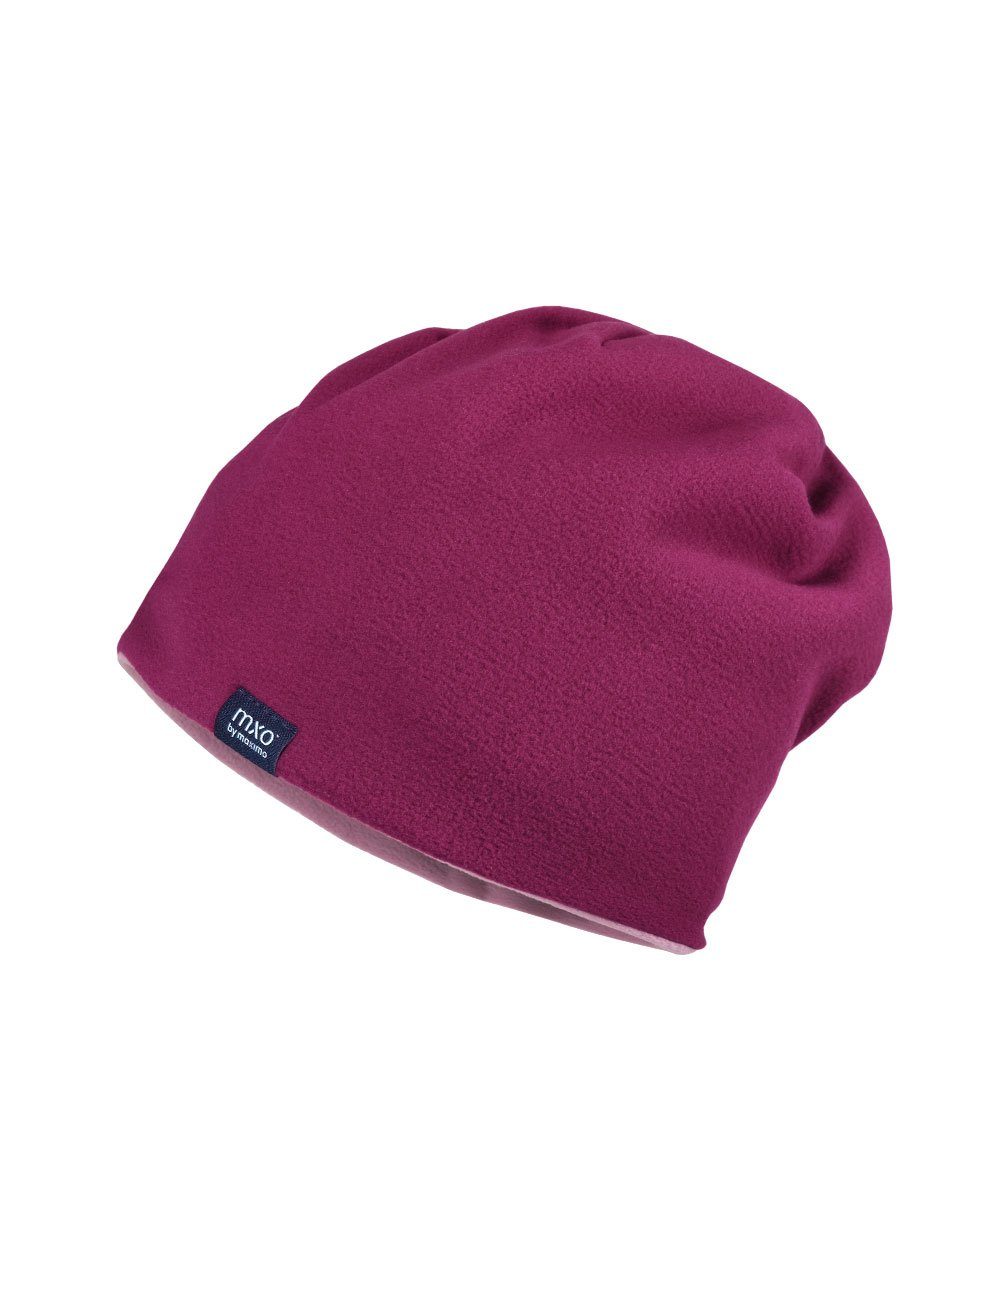 MAXIMO Beanie Beanie, Germany in Made brombeere/lilas Fleece two-one